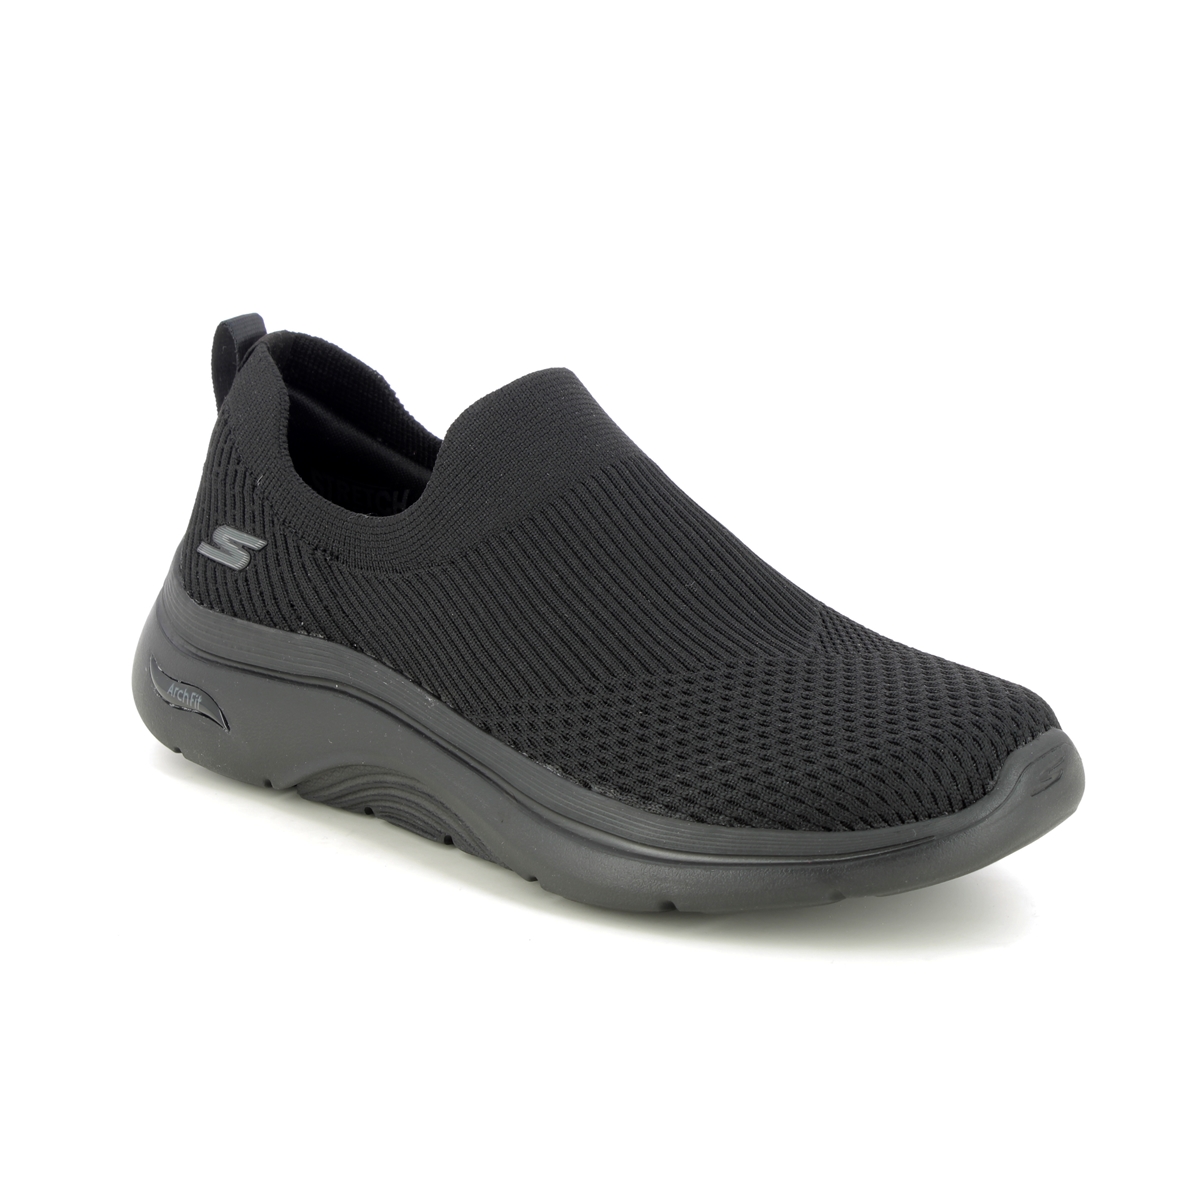 Skechers Arch Fit 2 Slip BBK Black Womens trainers 125300 in a Plain Textile in Size 7